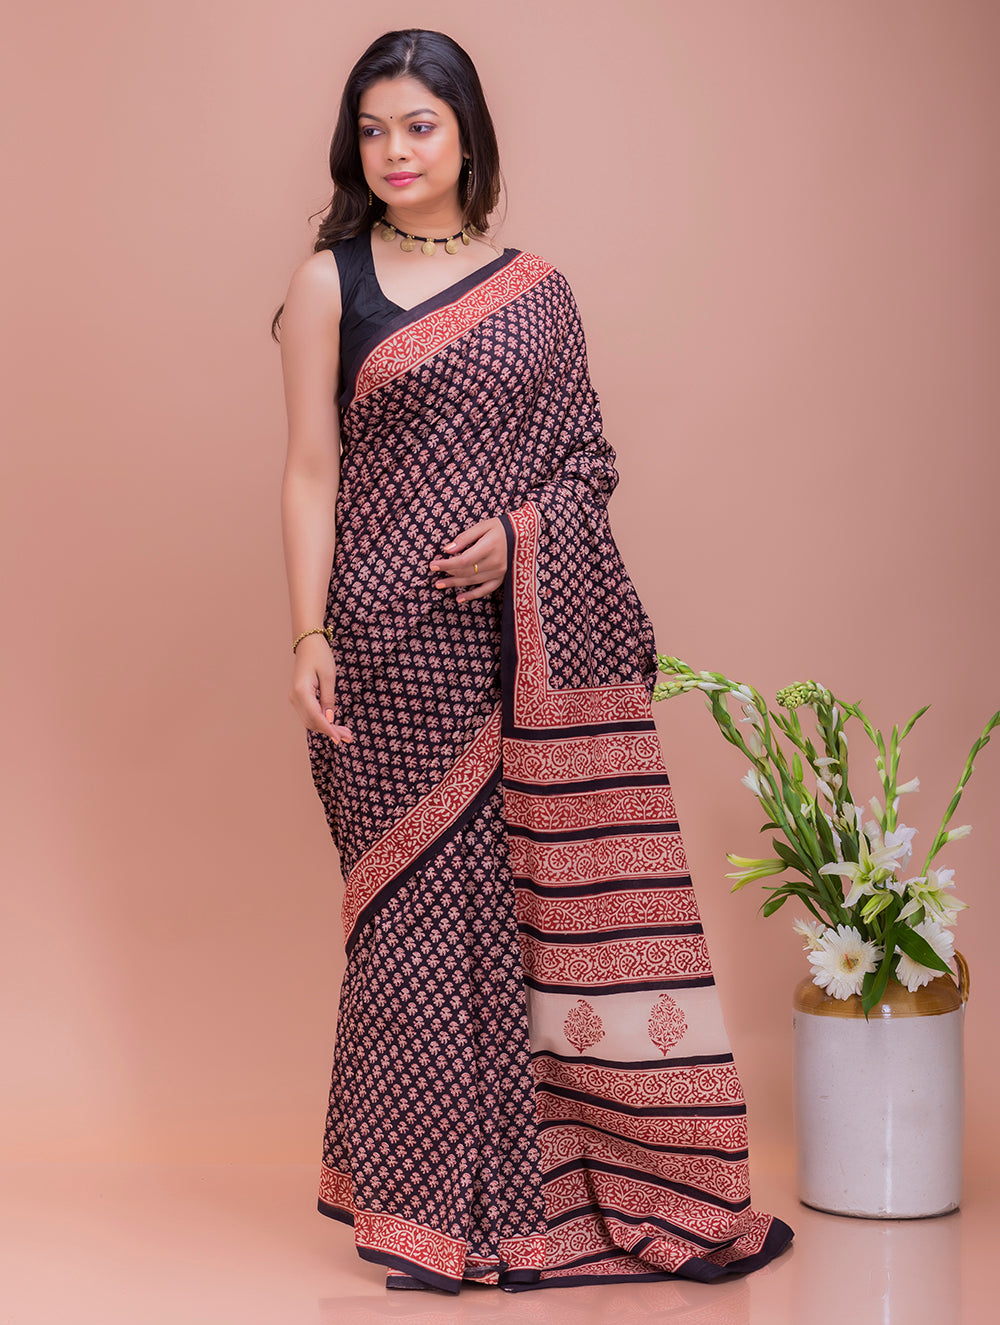 Load image into Gallery viewer, Summer Classics. Bagru Block Printed Mulmul Cotton Saree - Black &amp; Red Florets  